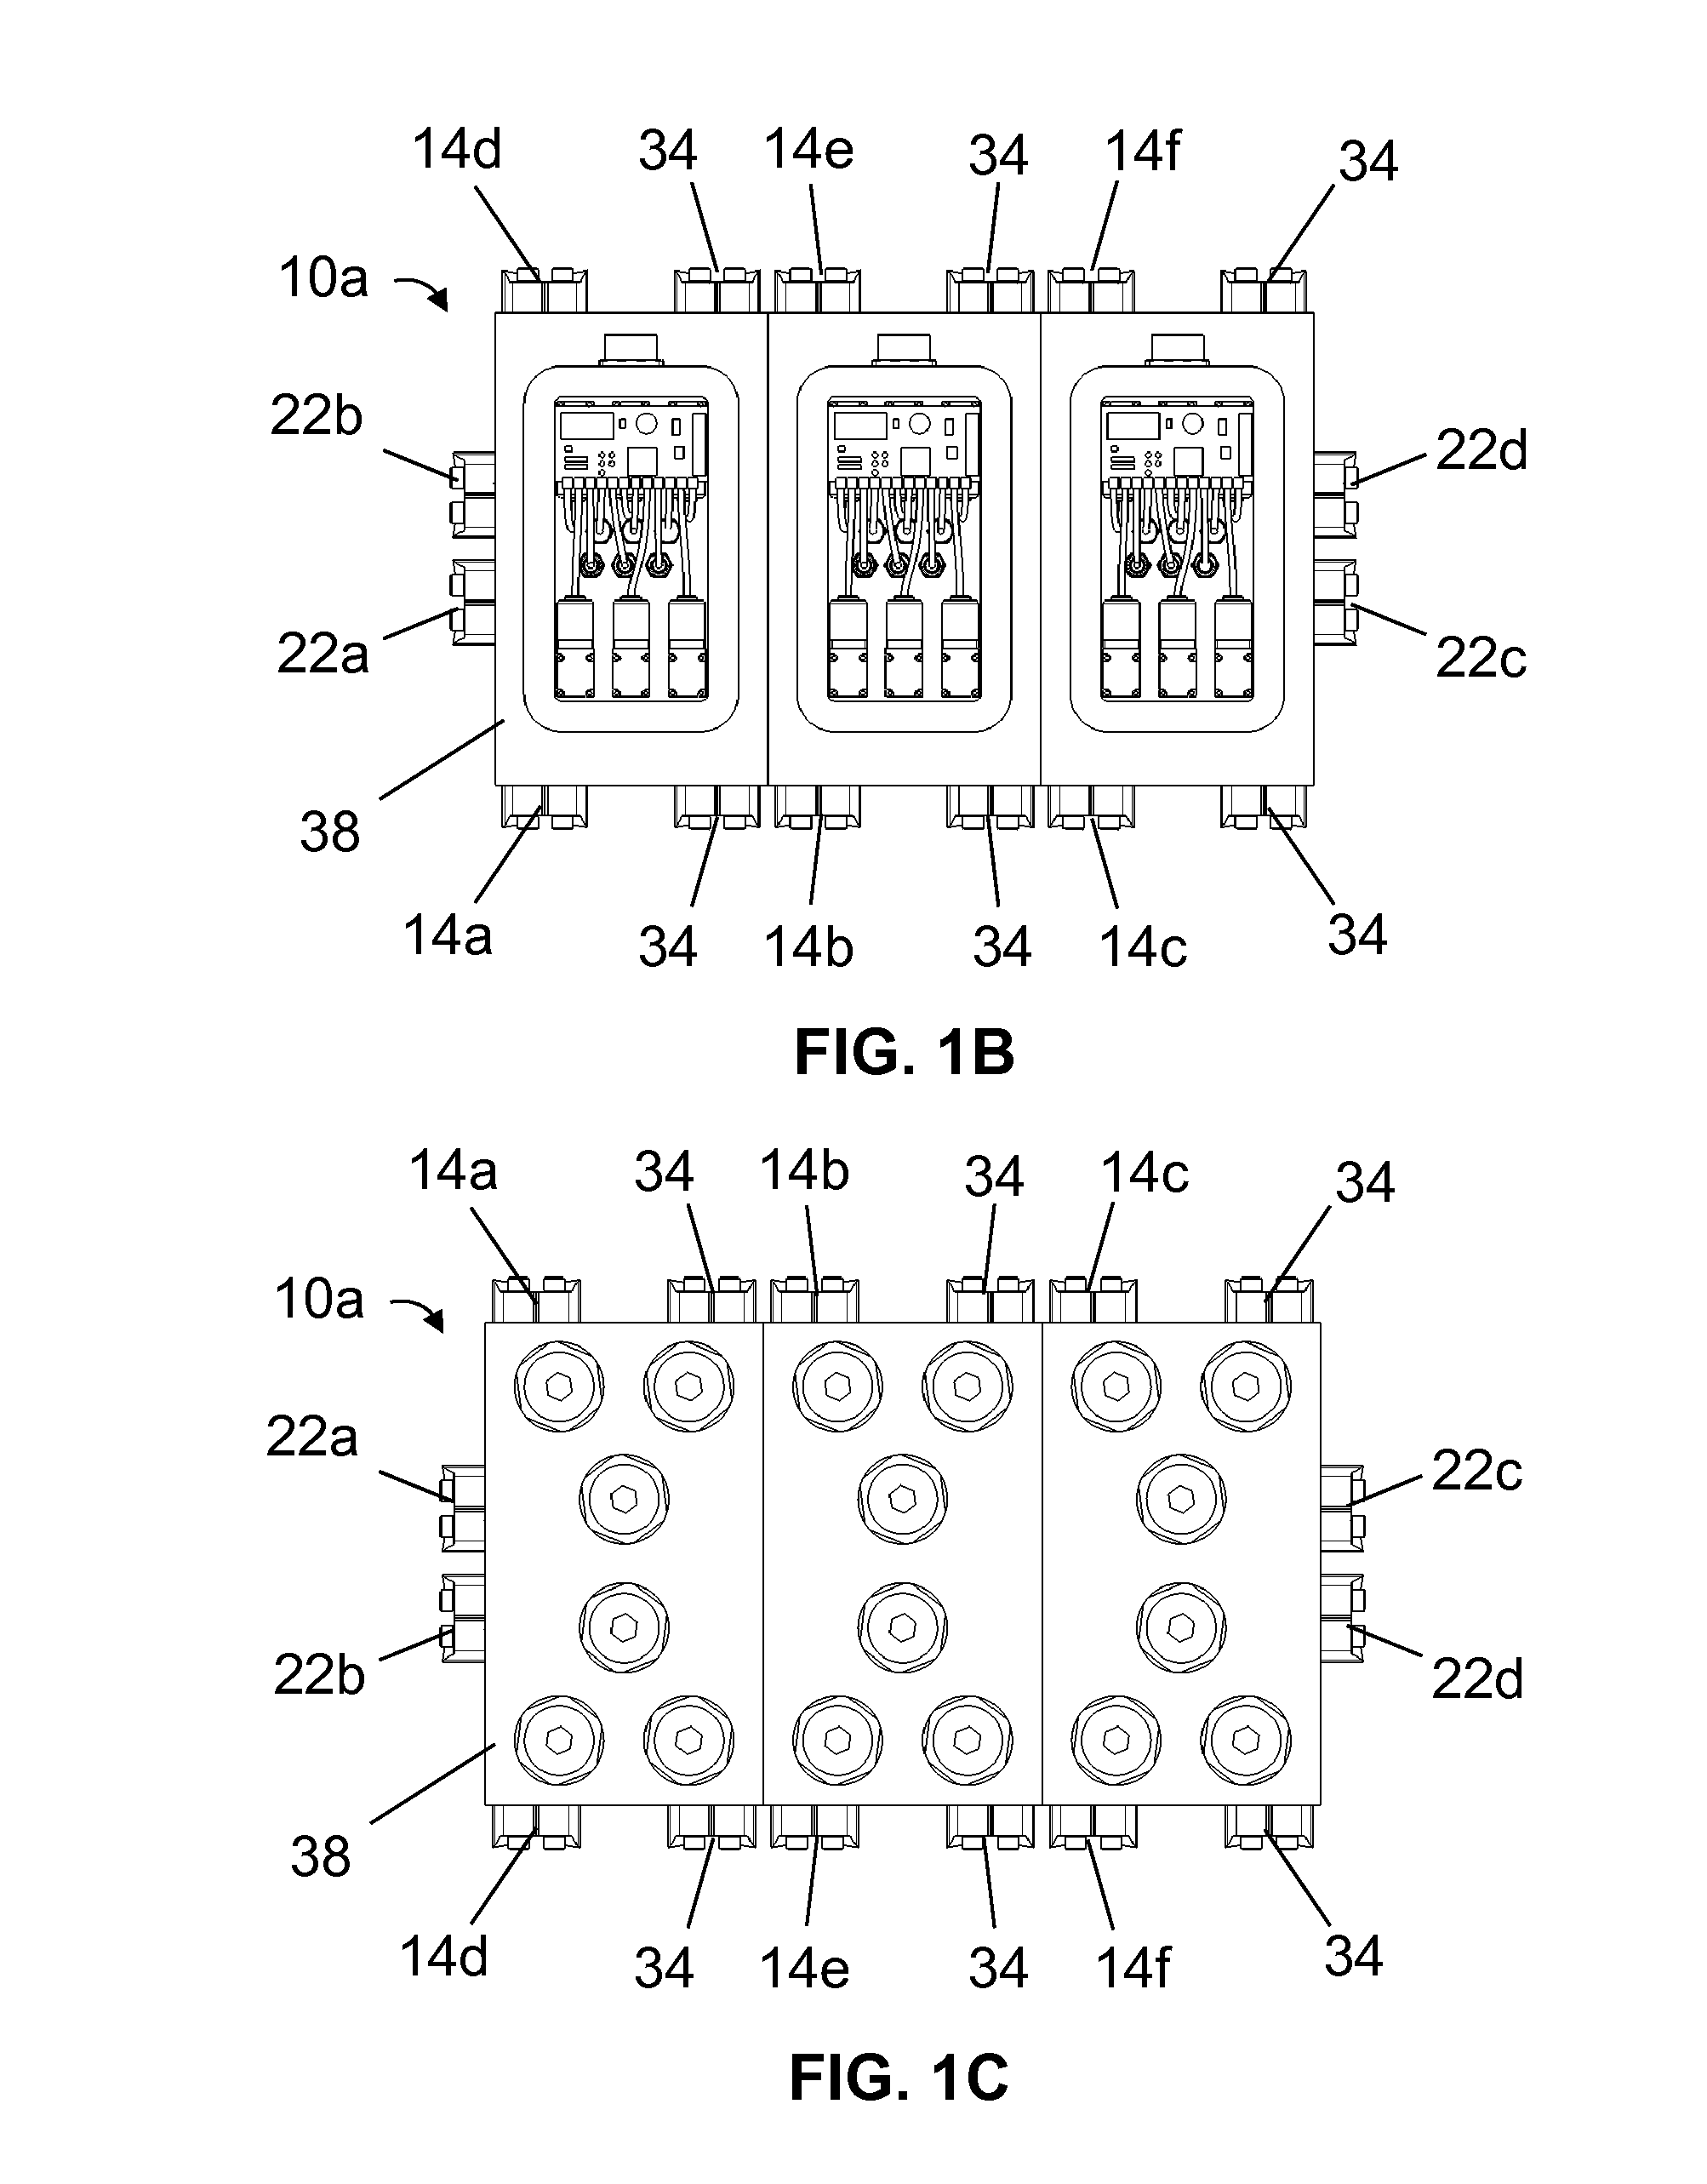 Manifolds for providing hydraulic fluid to a subsea blowout preventer and related methods